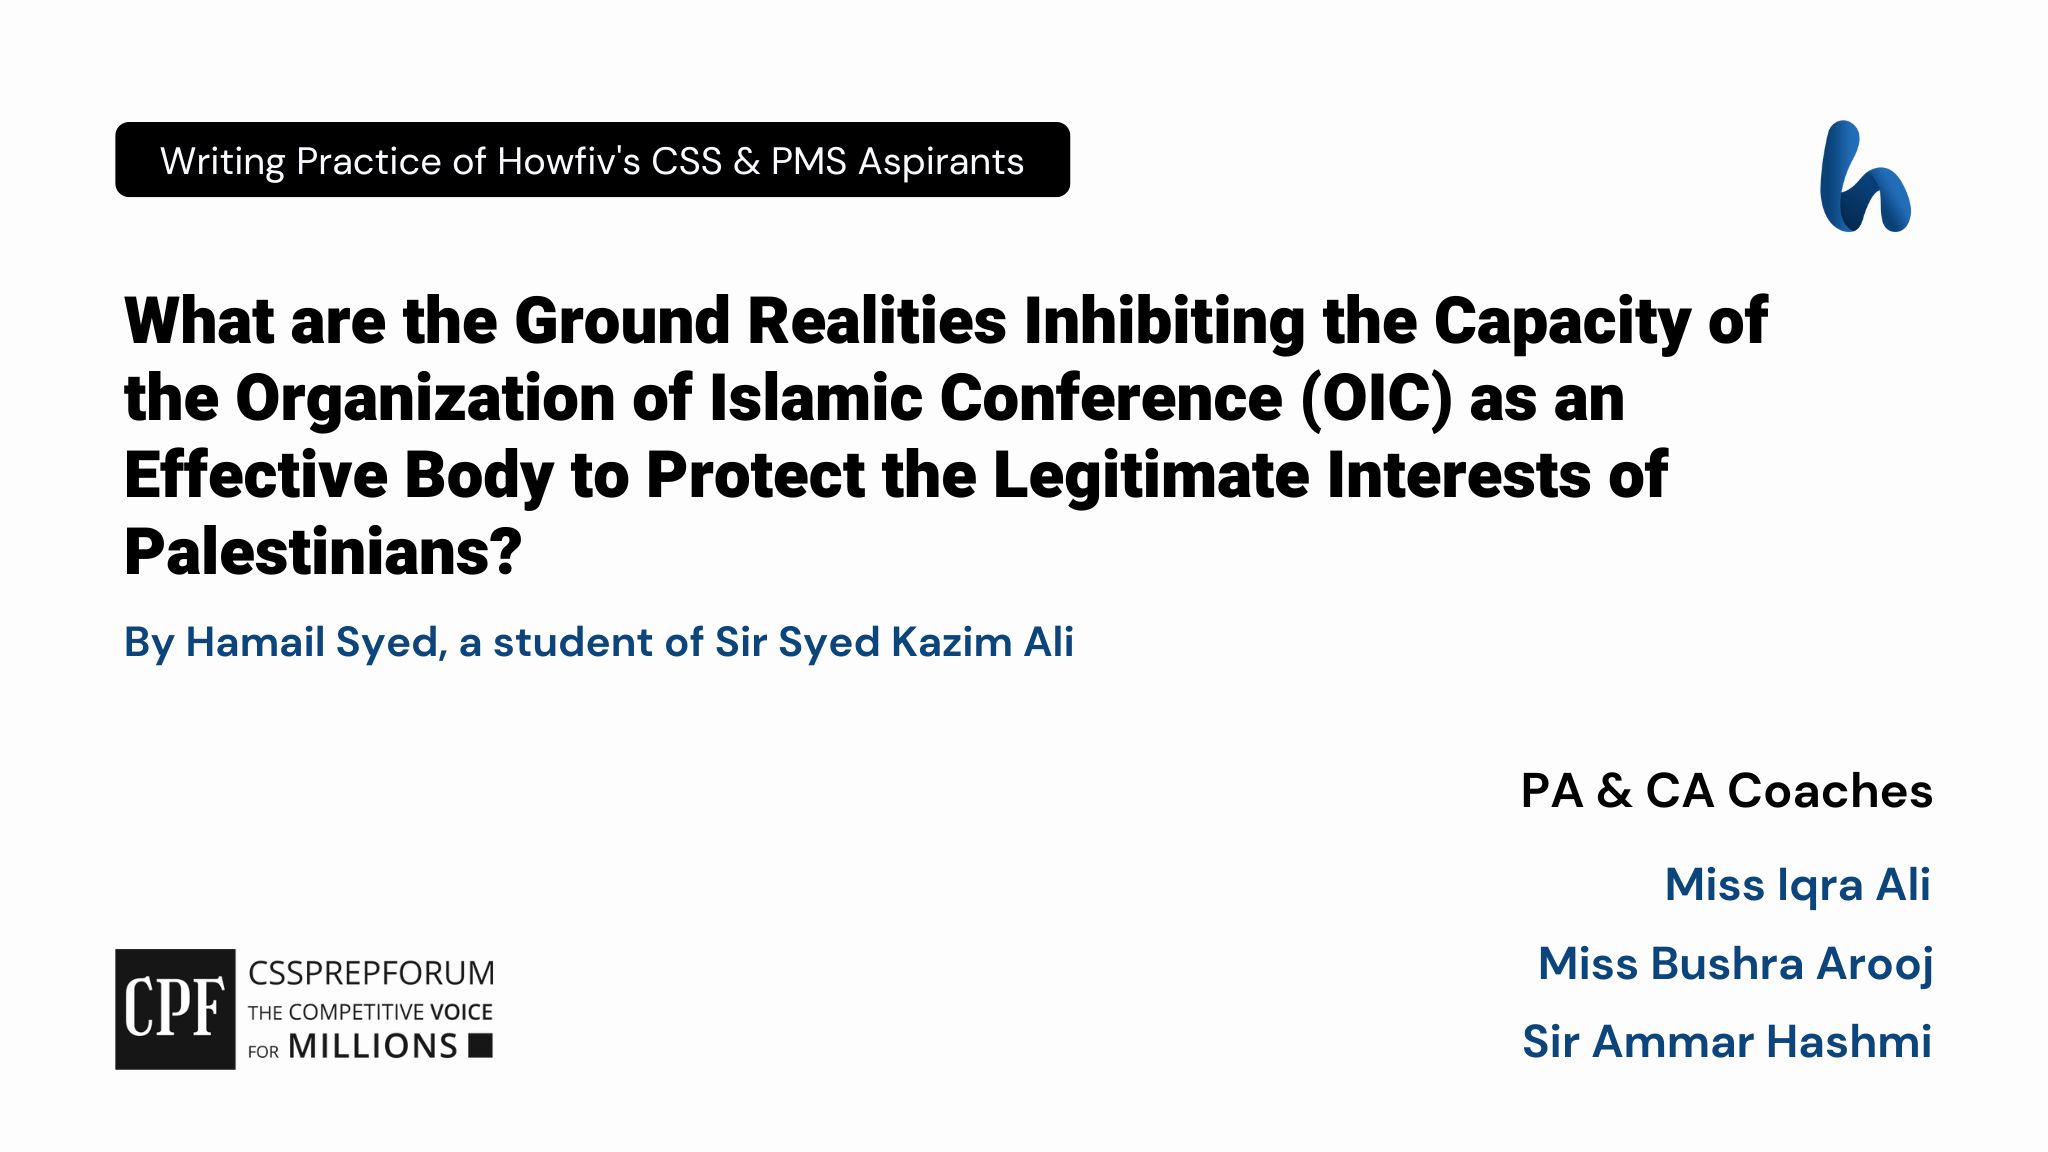 CSS Current Affairs Article | Ground Realities Inhibiting OIC to Protect the Legitimate Interests of Palestinians | is Written by Hamail Syed Under the Supervision of Sir Ammar Hashmi...